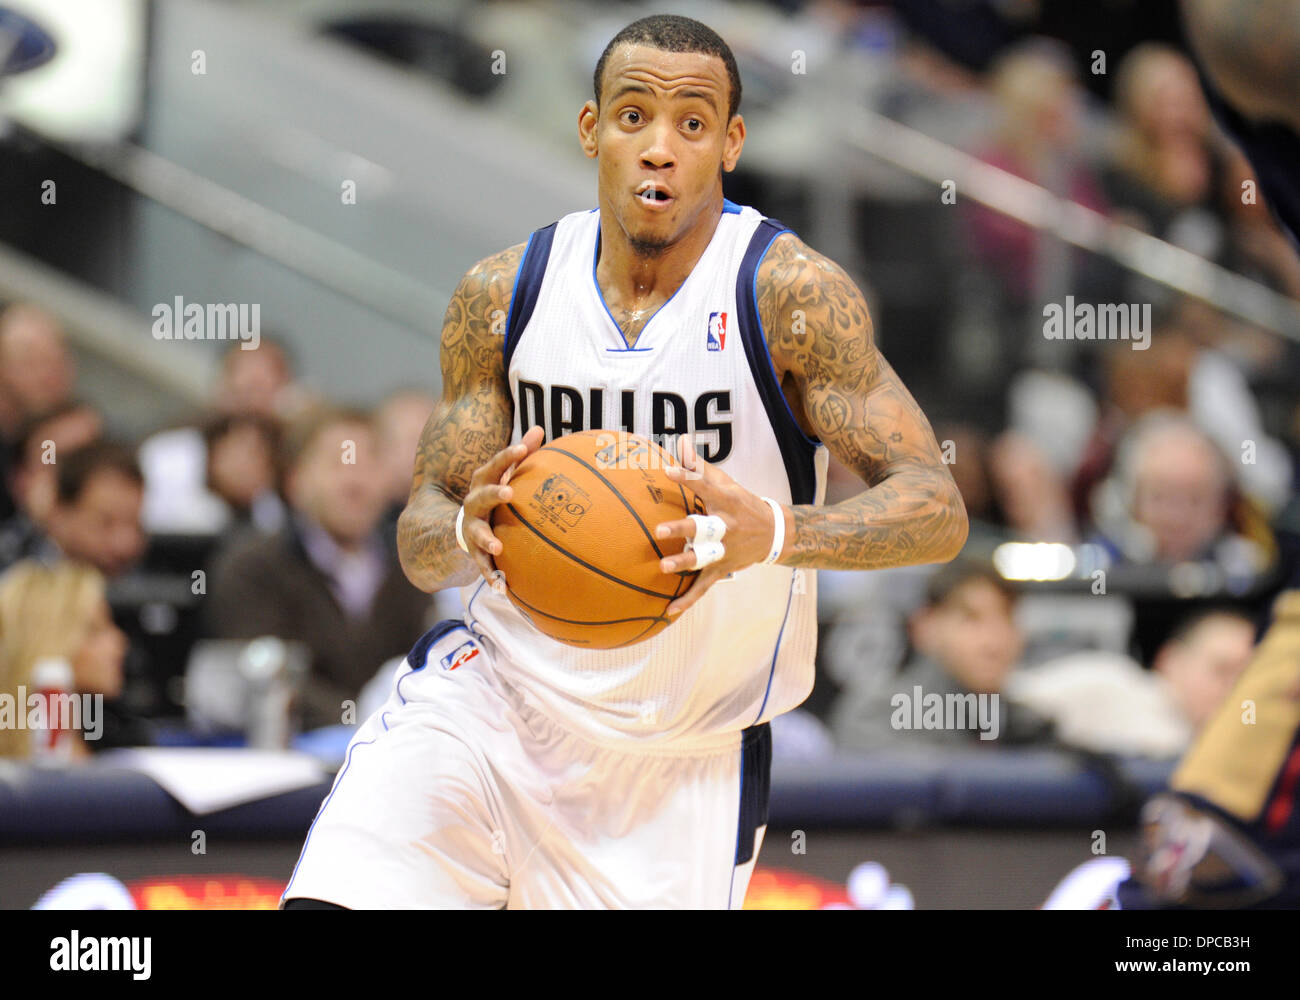 Jan 11, 2014: Dallas Mavericks shooting guard Monta Ellis #11 scored 26  points during an NBA game between the New Orleans Pelicans and the Dallas  Mavericks at the American Airlines Center in